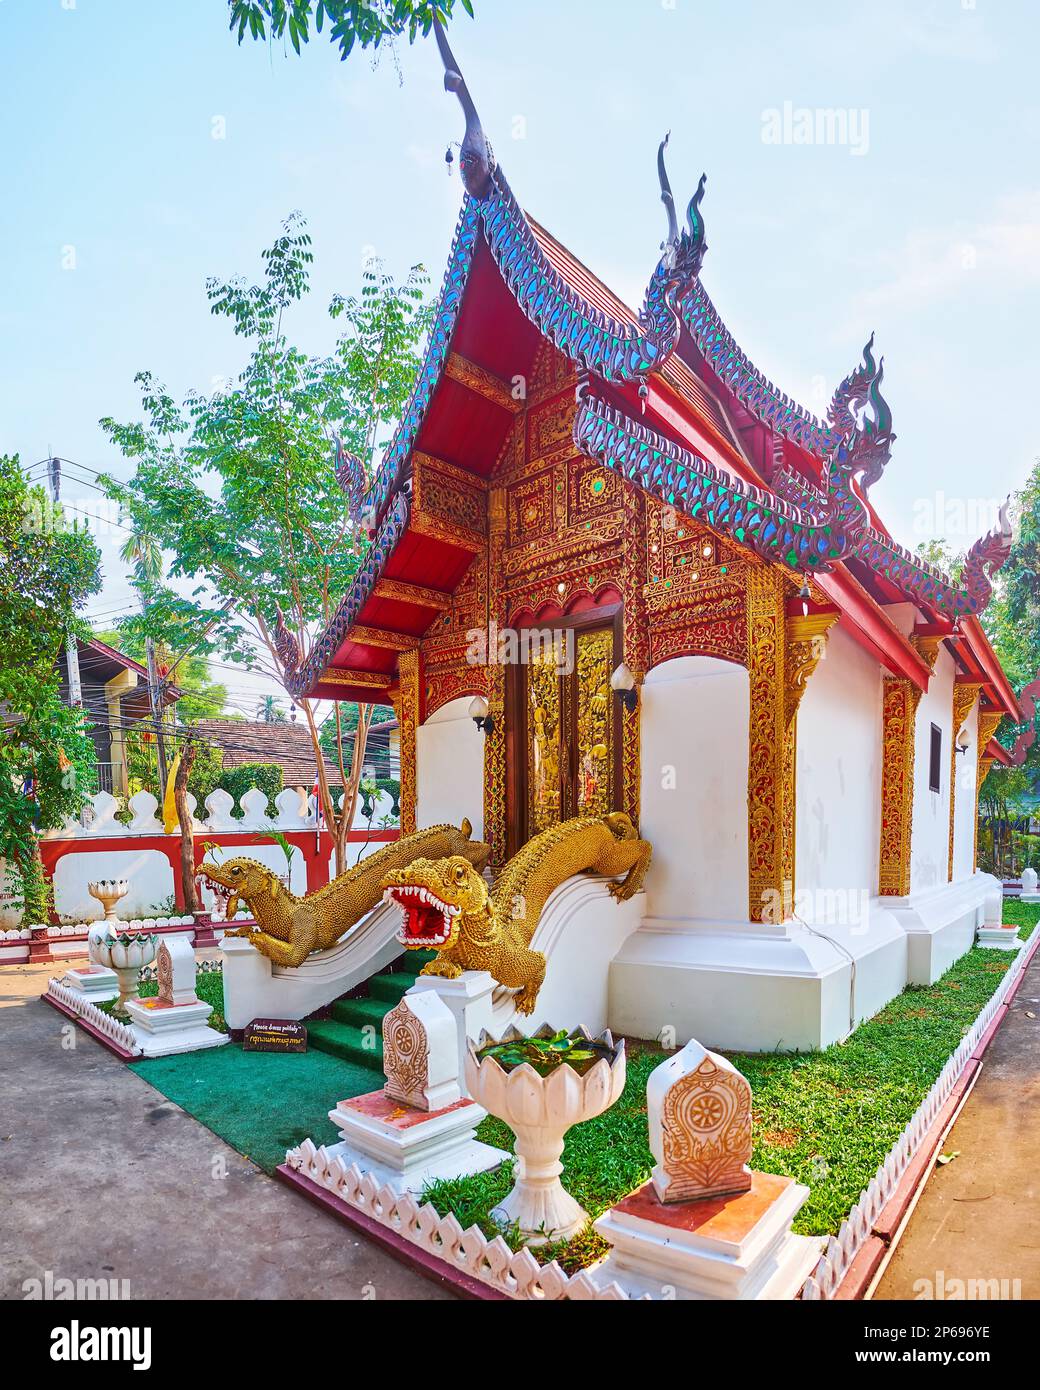 The splendid Lanna style Ubosot of Wat Umong Mahathera Chan with Mom statues, golt carvings, pyathat roof, Naga serpents on bargeboards, Chiang Mai, T Stock Photo